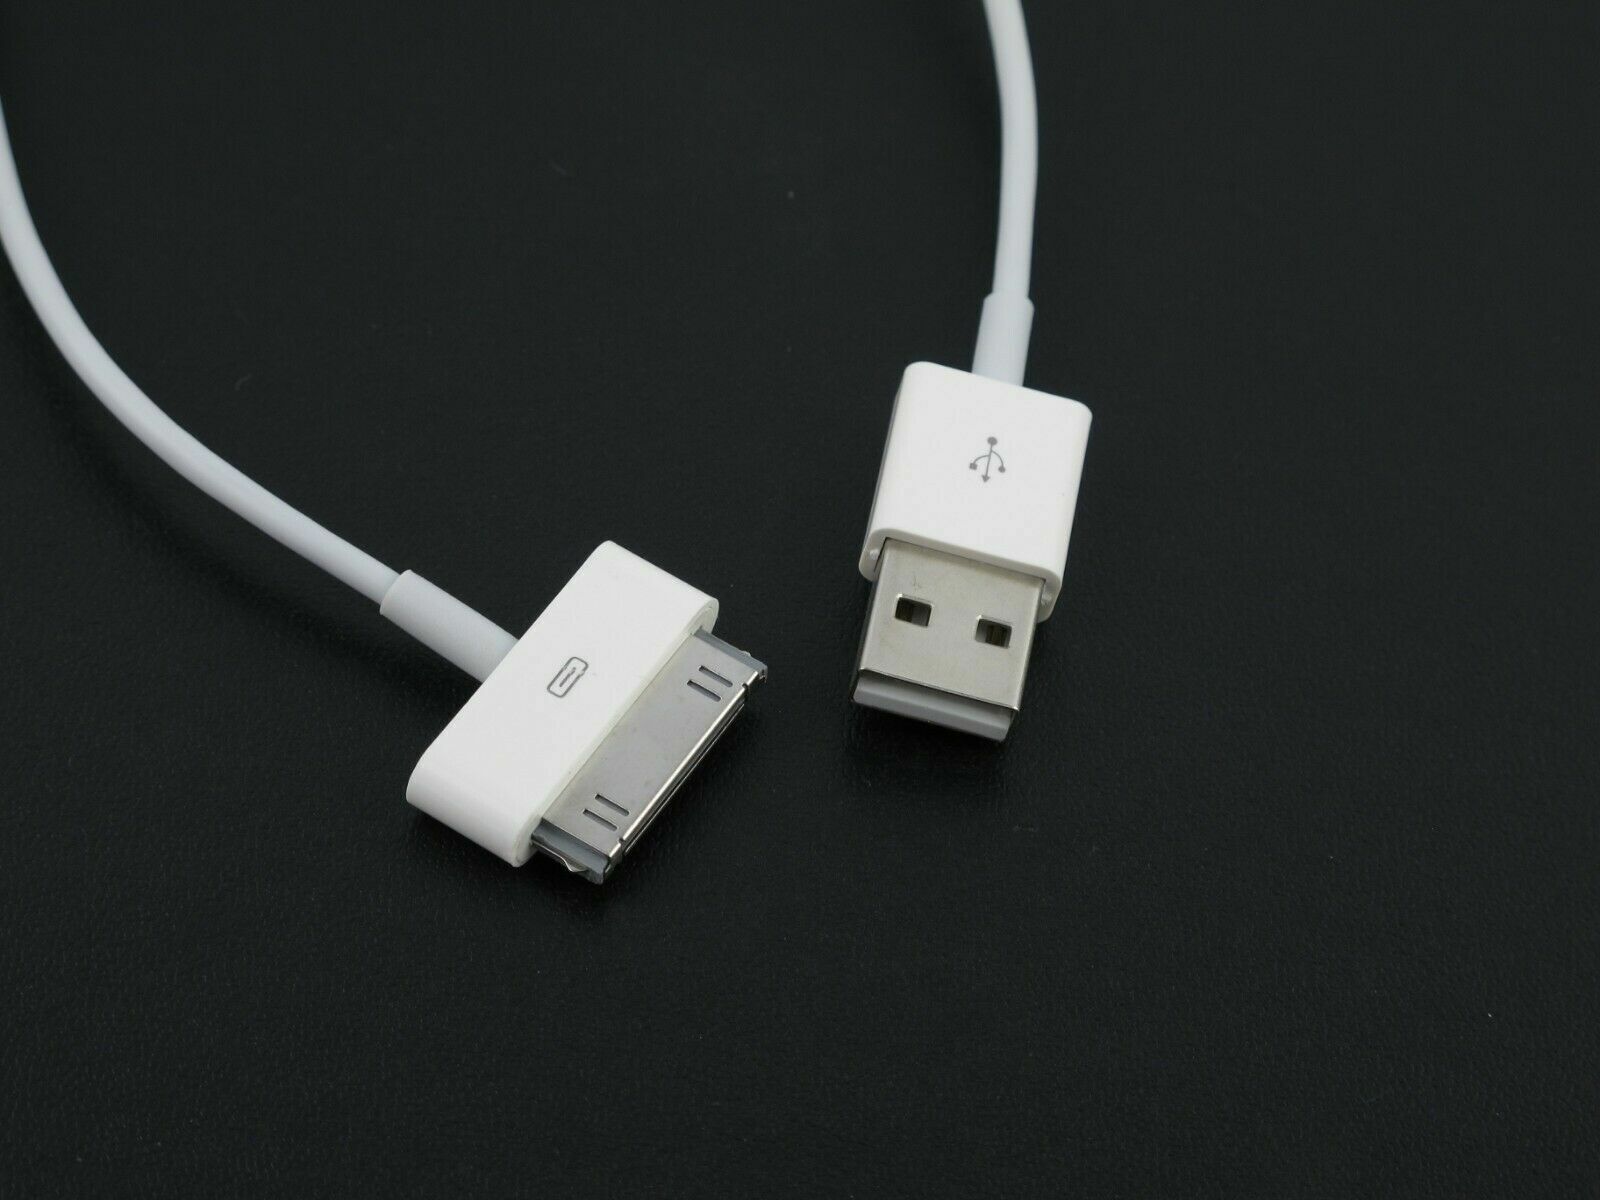 2 USB Charger Cable for Tablet Apple iPad 1 2 3 1st 2nd 3rd GEN Unbranded Does Not Apply - фотография #4